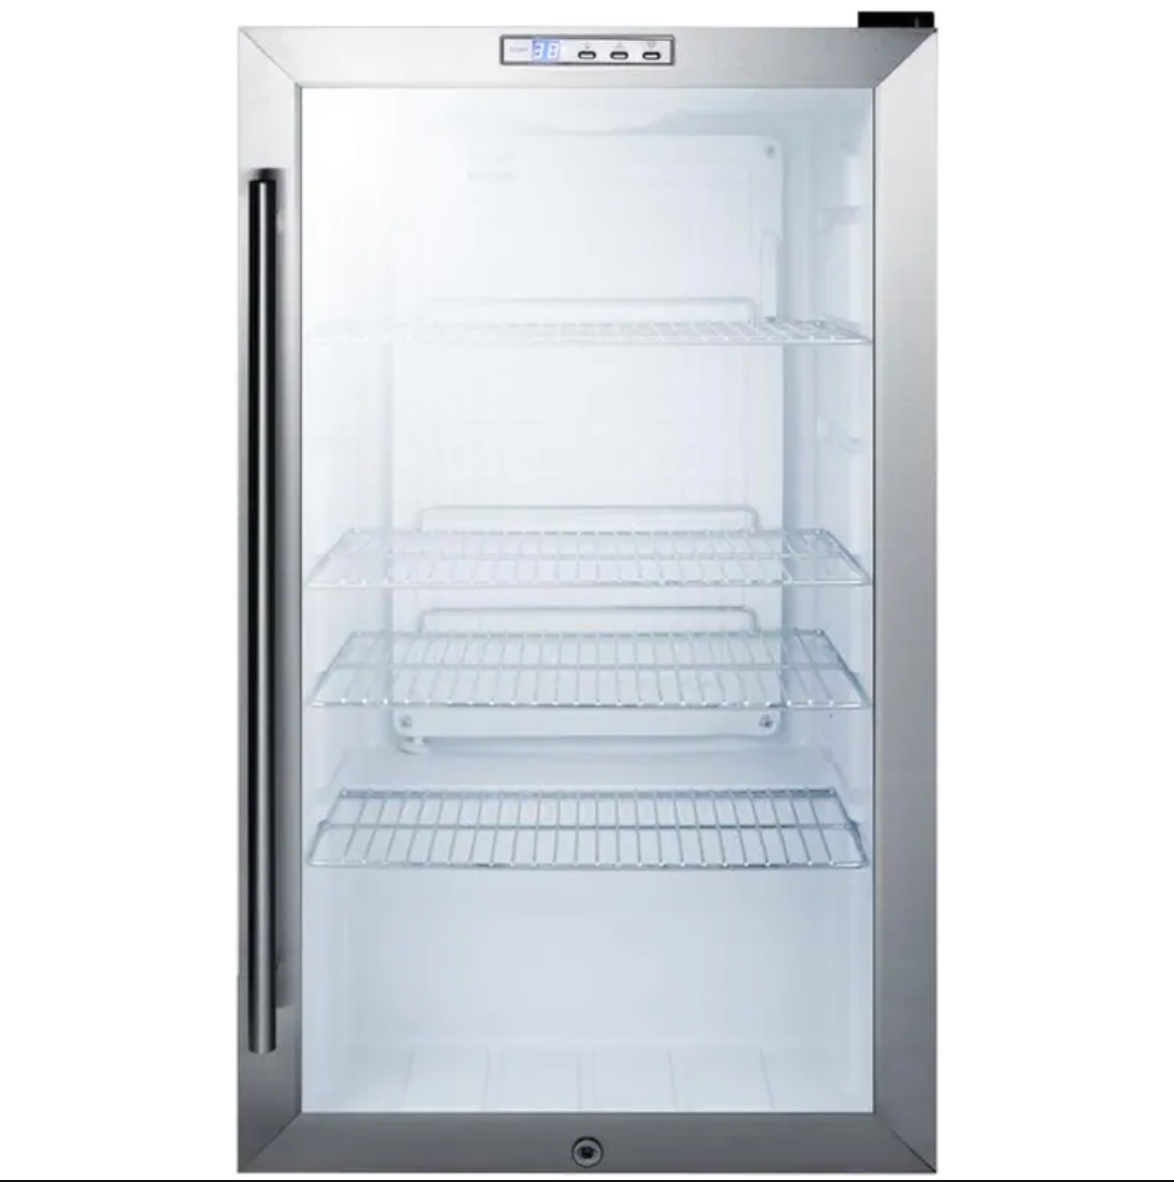 Summit Appliance SCR486L Commercial Beverage Center, 3.35 Cu. Ft. with1-Year Warranty